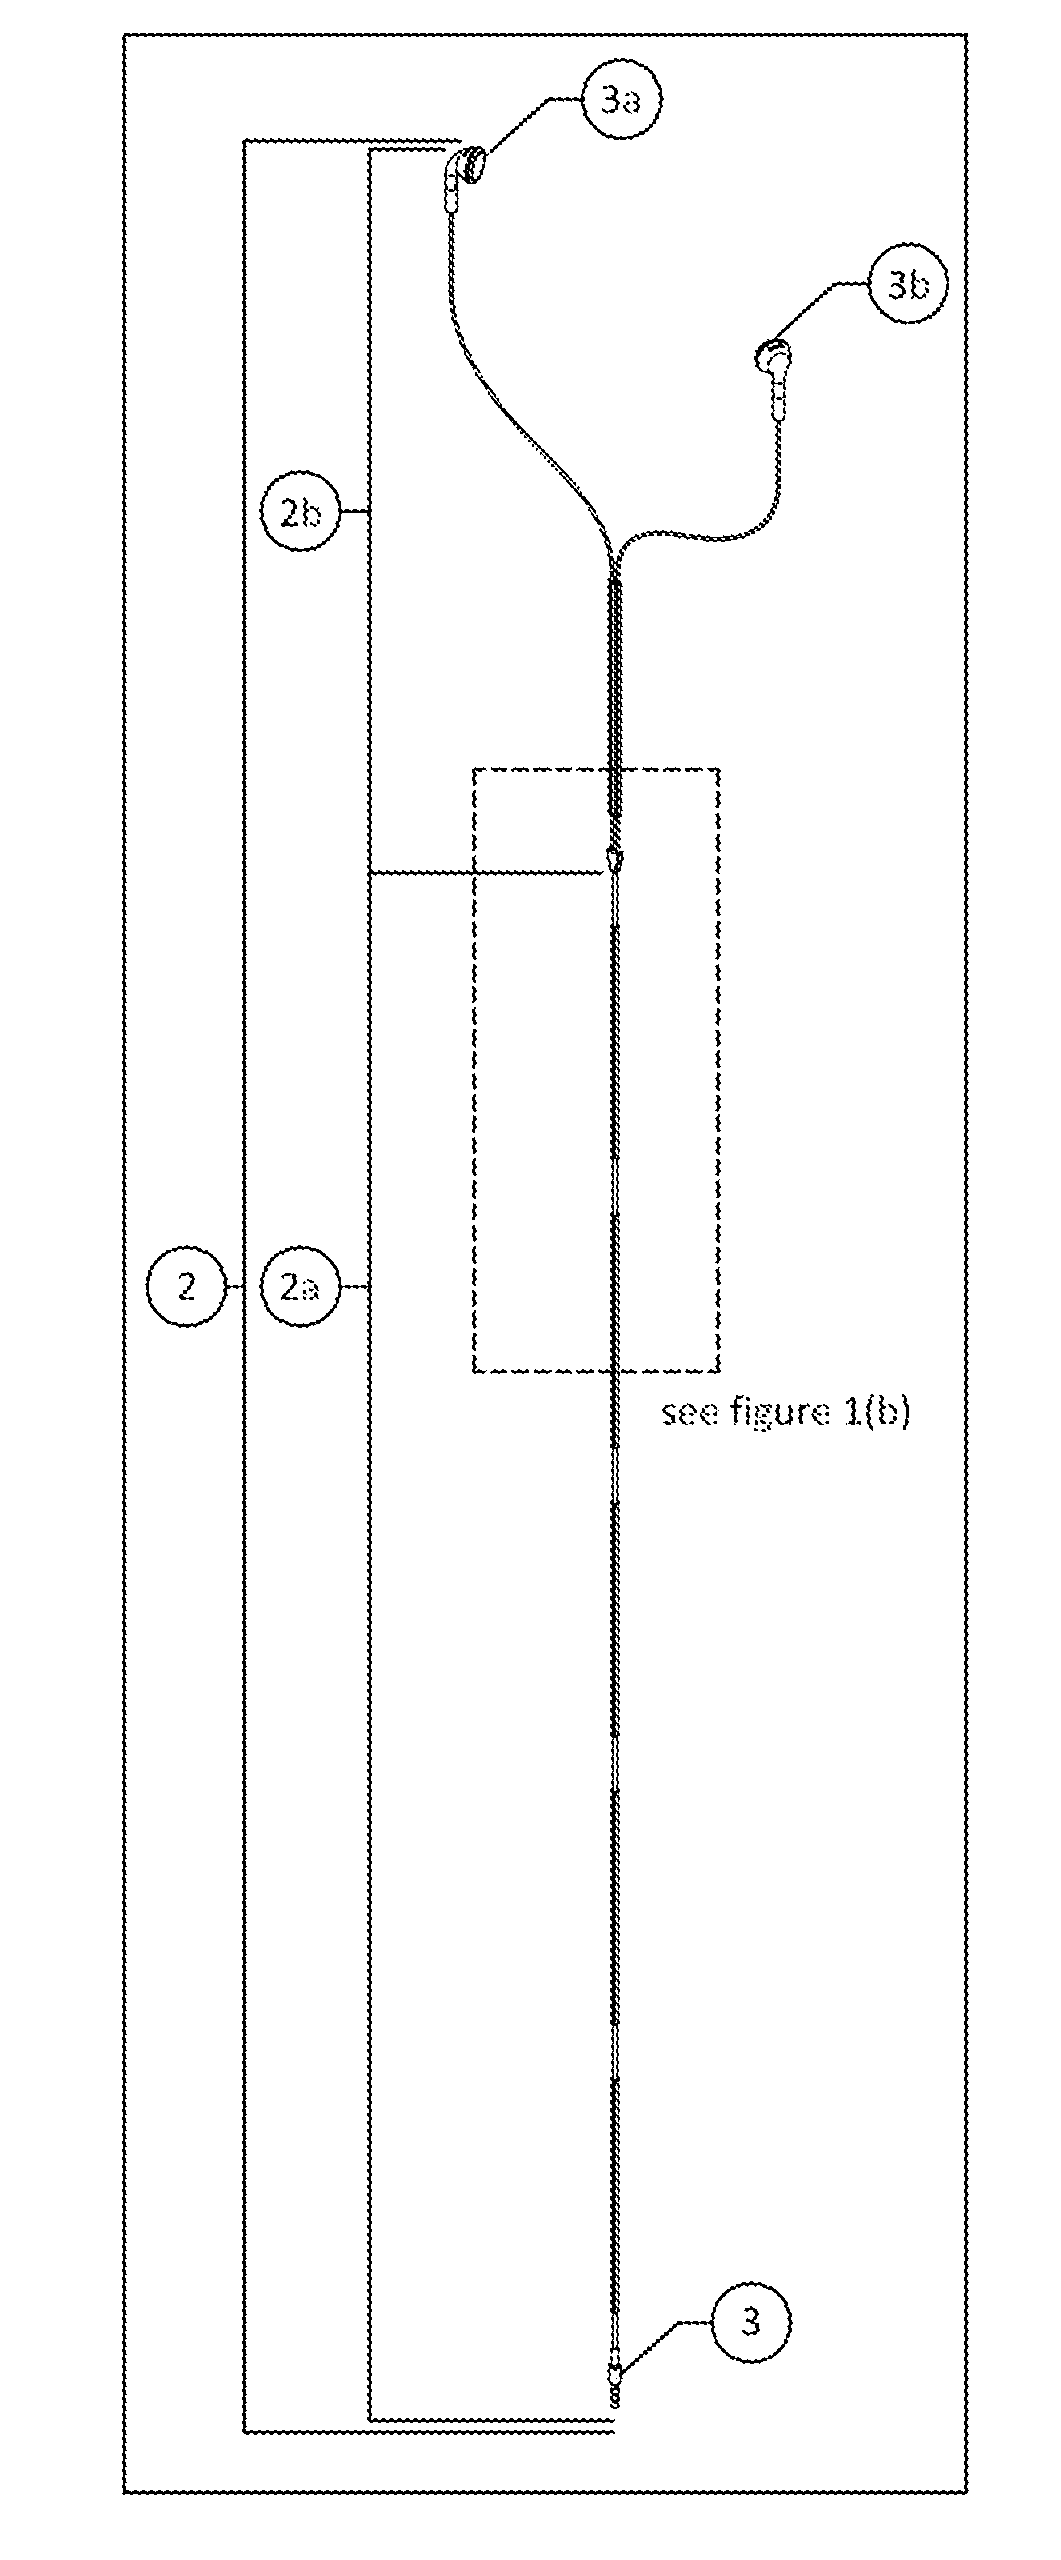 Cord management device and method